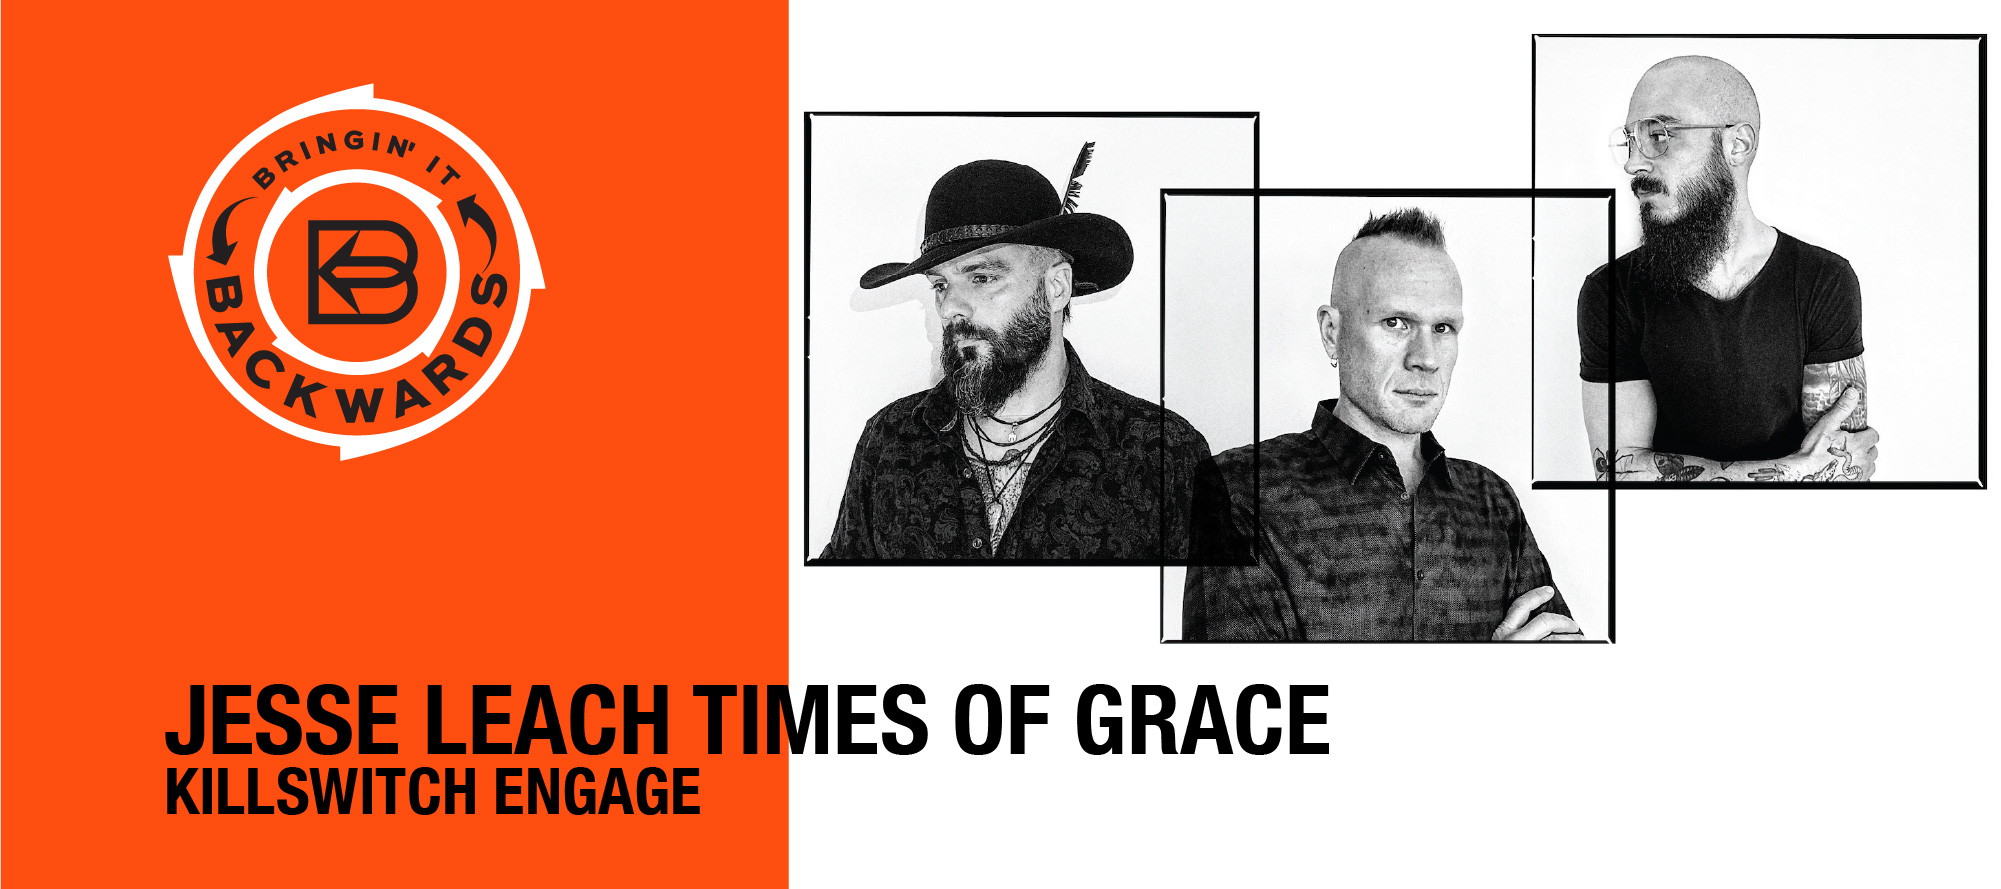 Bringin’ it Backwards: Interview with Jesse Leach of Times of Grace / Killswitch Engage